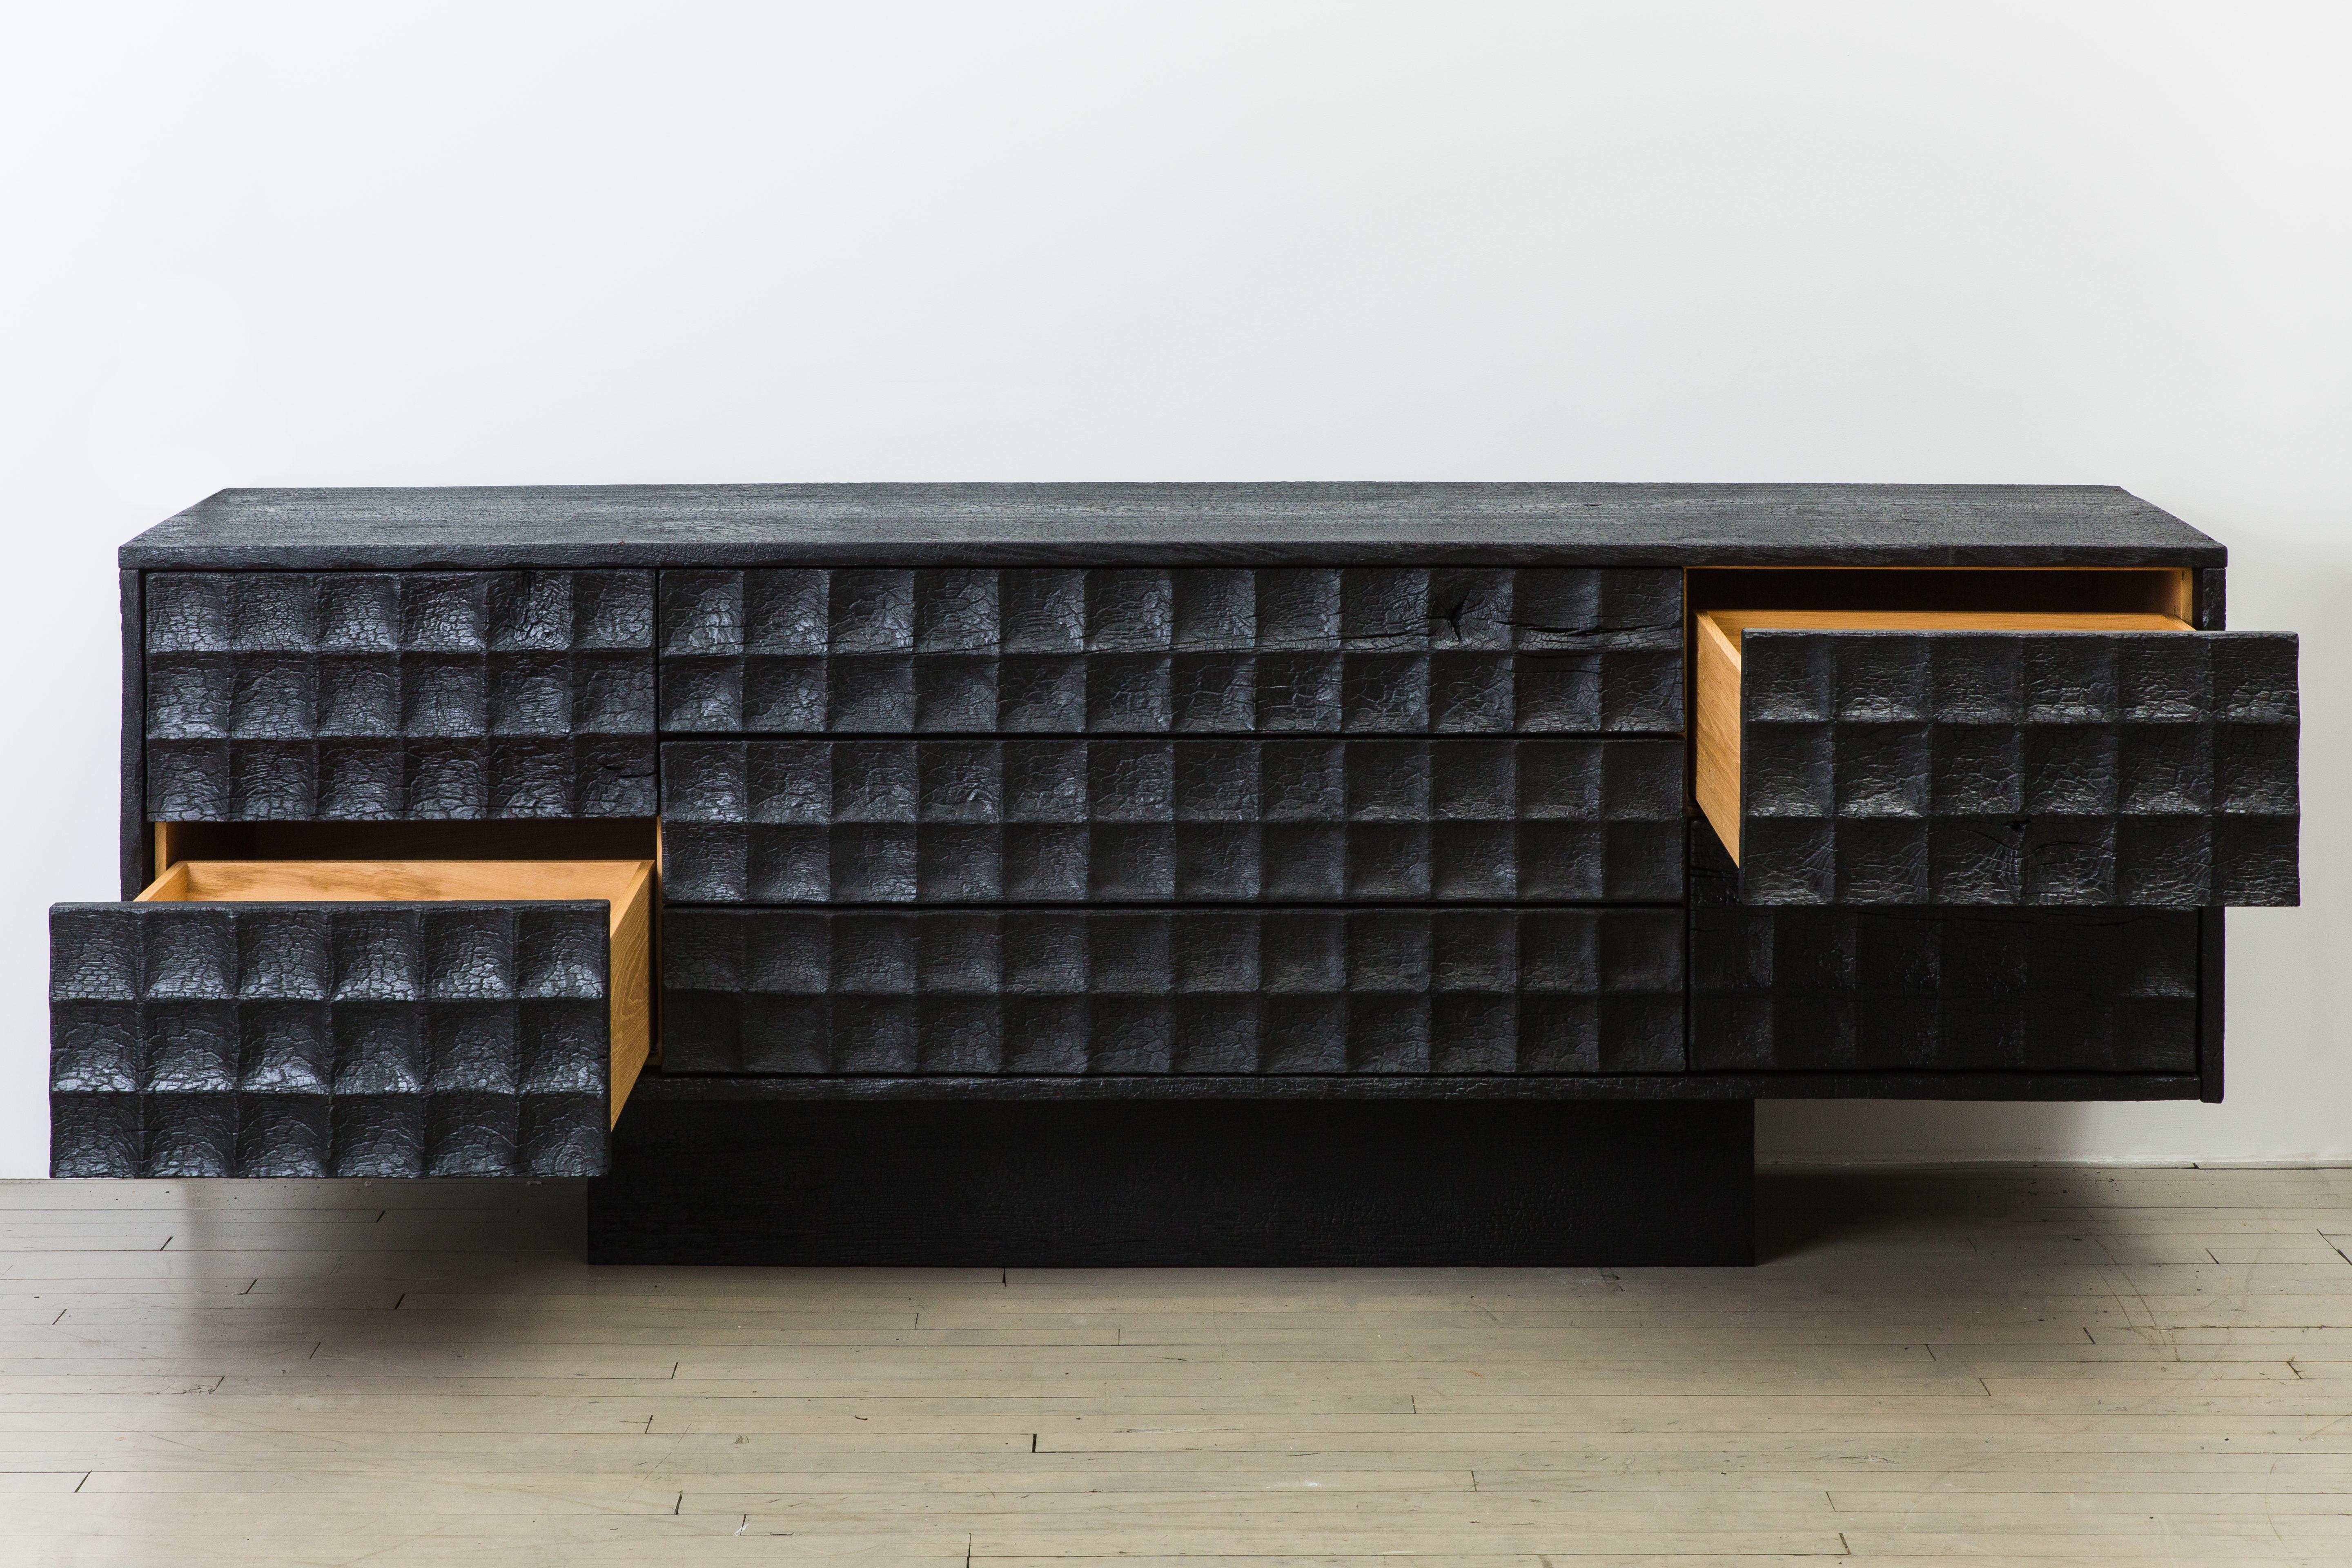 The Pure Black Console is the third piece in Yard Sale Project’s new Pure Black series. It is made from Oak, with Cedar of Lebanon drawer bottoms. The wood is finished using the shou-sugi-ban method, an ancient Japanese finishing technique that